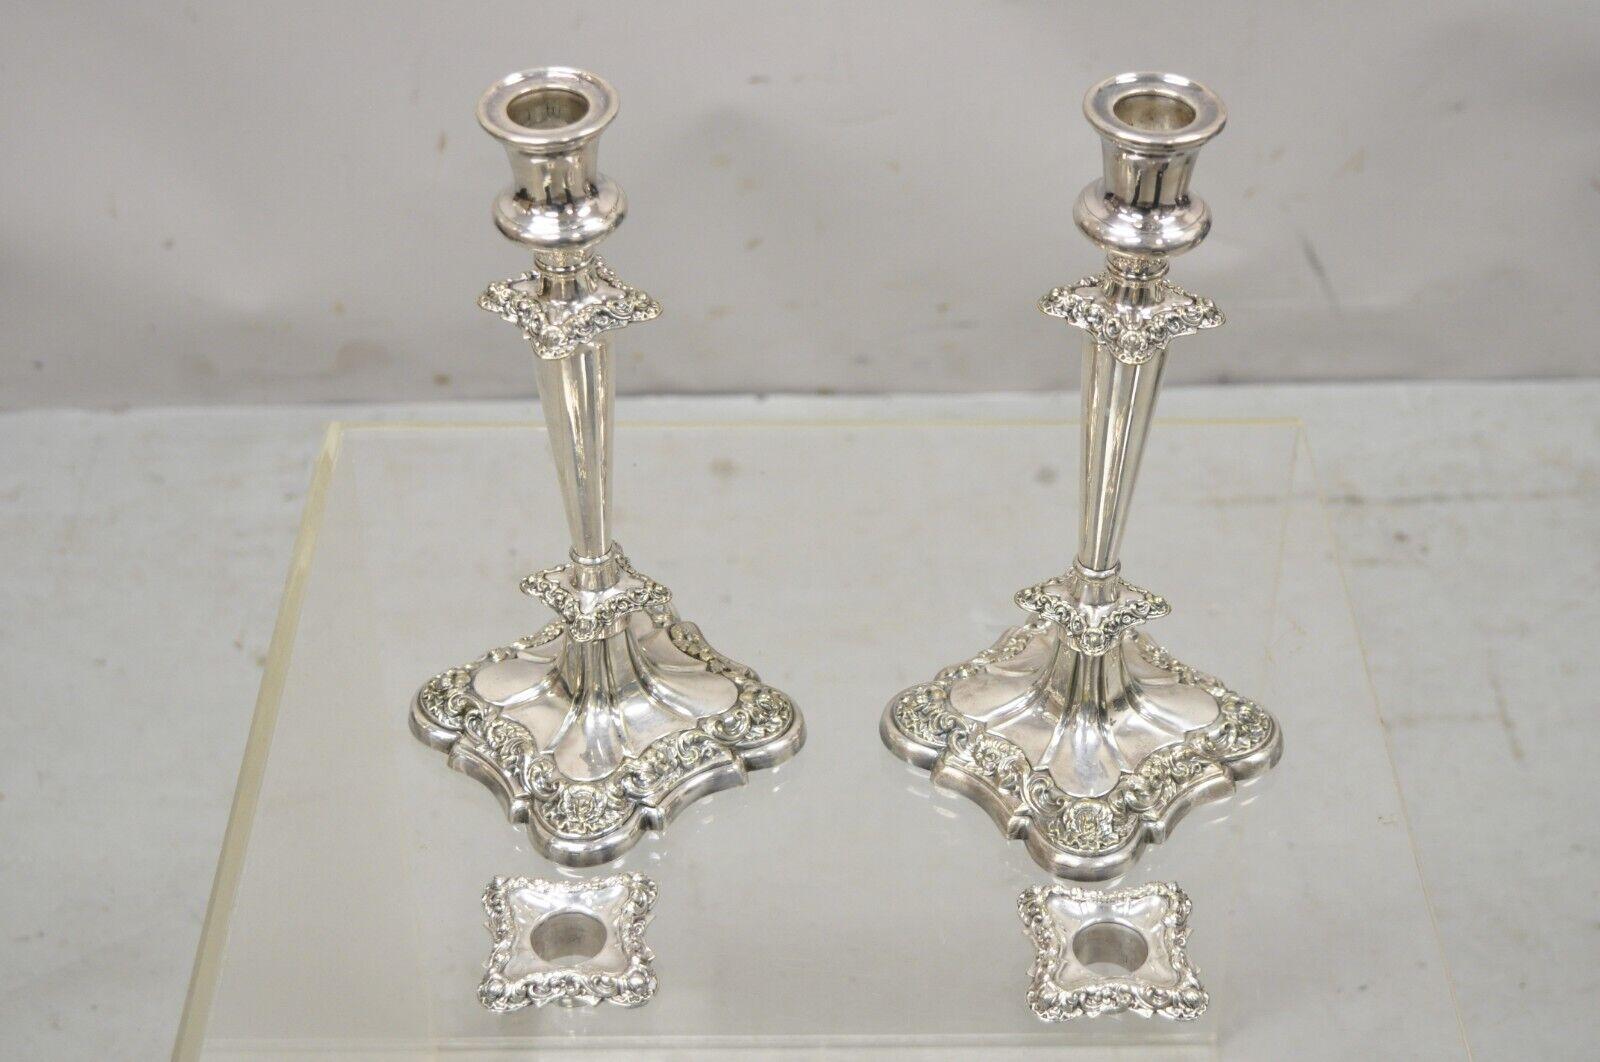 Antique Gorham Floral Repousse Silver Plate Candlestick Candle Holder a Pair 4